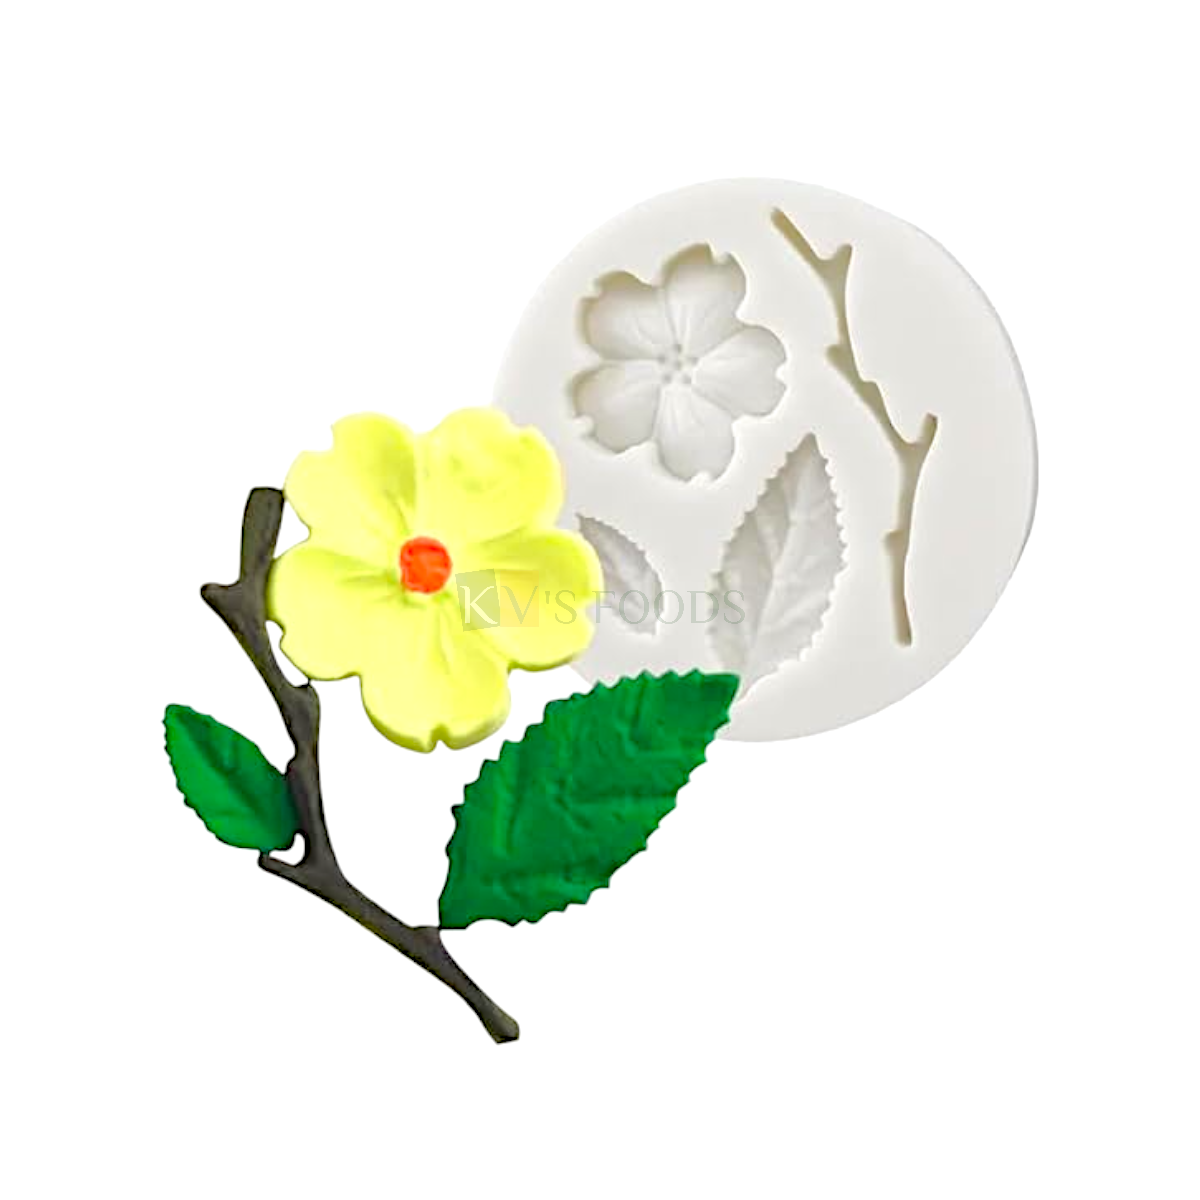 1 PC Silicone Fondant Small Plum Flower Leaves Branch Chocolate Mould 1 Cavity, Wedding Anniversary Theme Colourful Flowers Cupcake Theme, Garden Theme Cakes Happy Birthday Theme Flexible Moulds